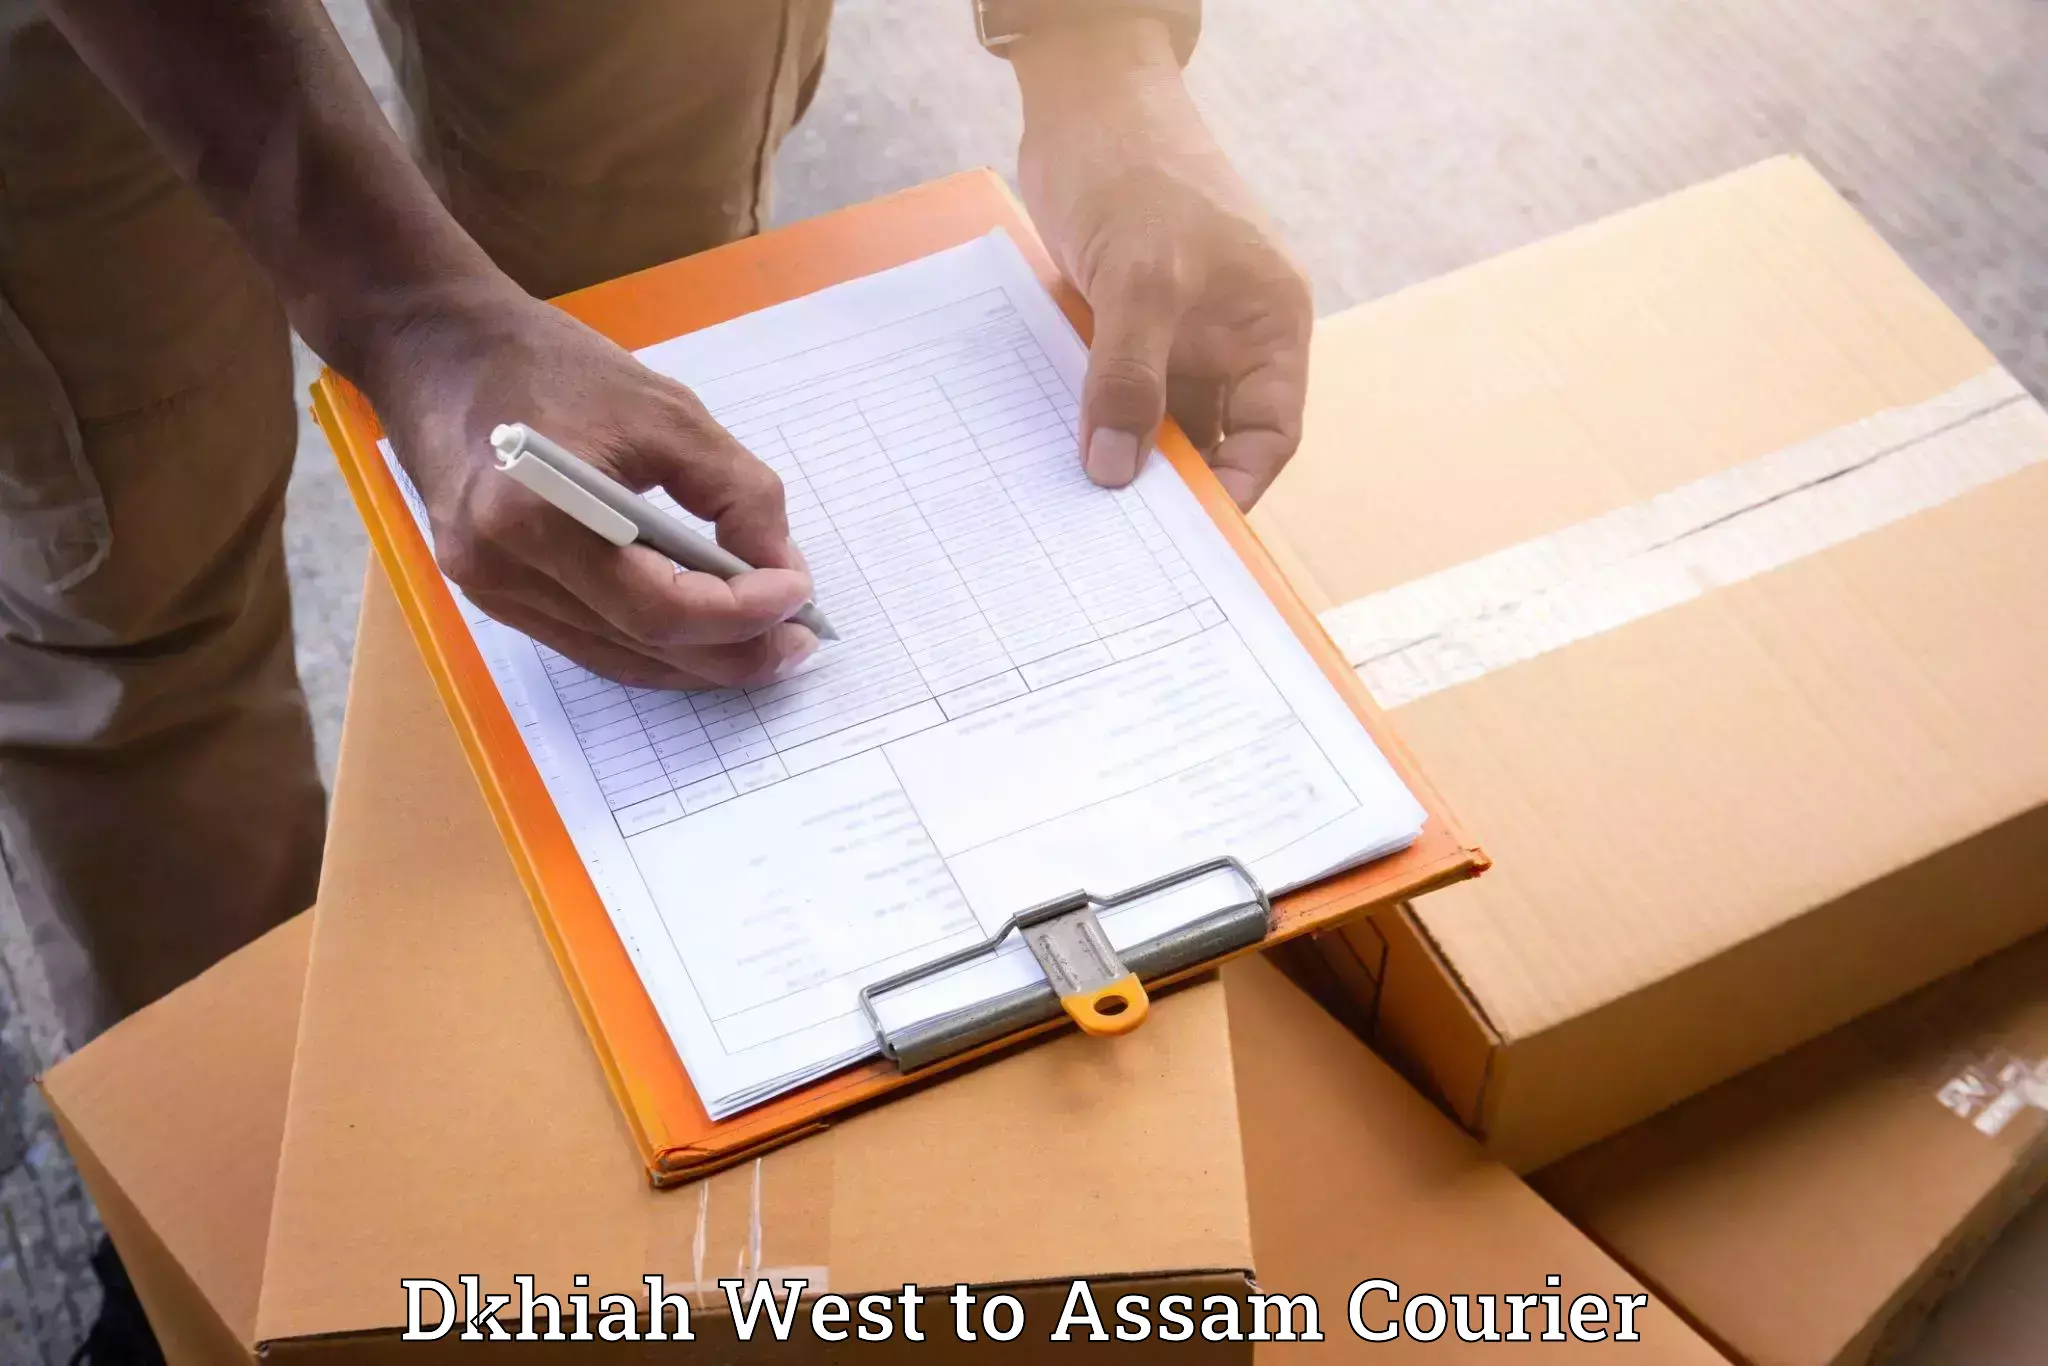 Furniture relocation experts Dkhiah West to Sonitpur